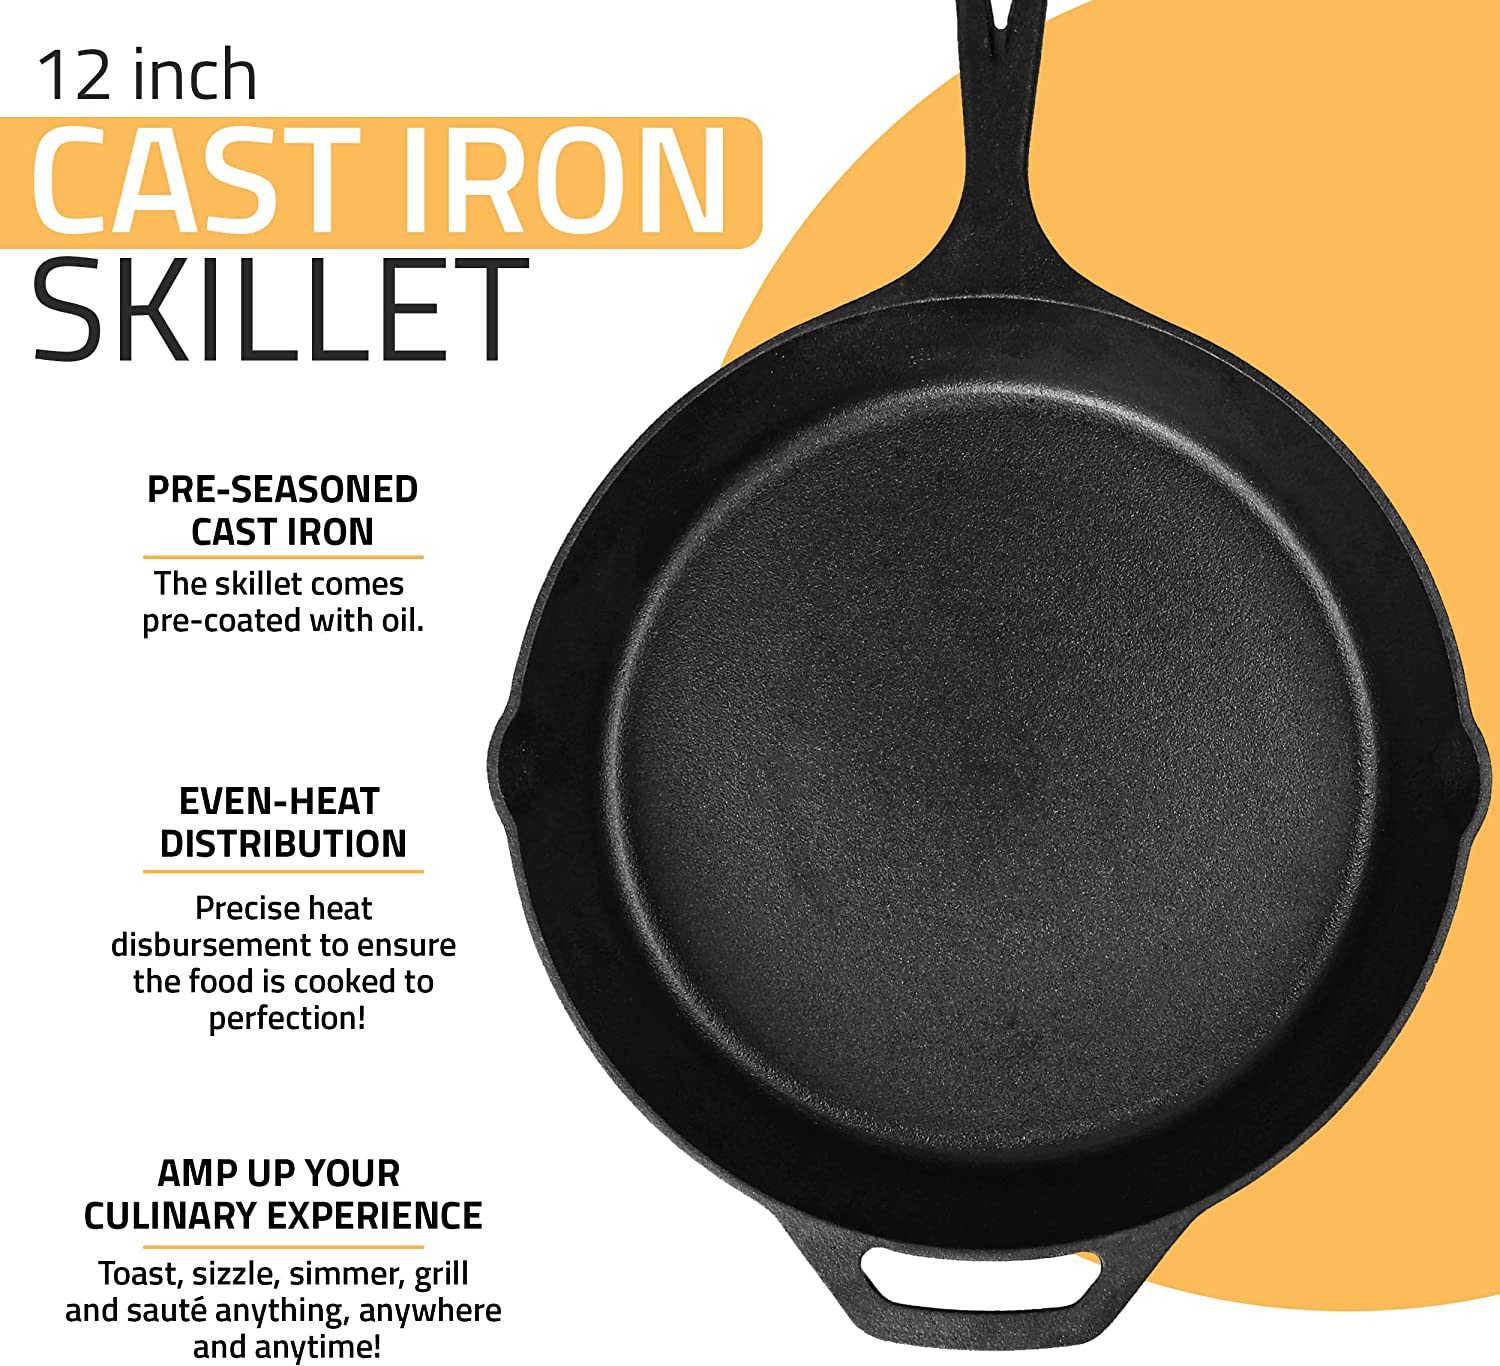 Utopia Kitchen Saute Fry Pan - Pre-Seasoned Cast Iron Skillet Set 3-Piece - Frying Pan 6 inch, 8 inch and 10 inch Cast Iron Set (Black)